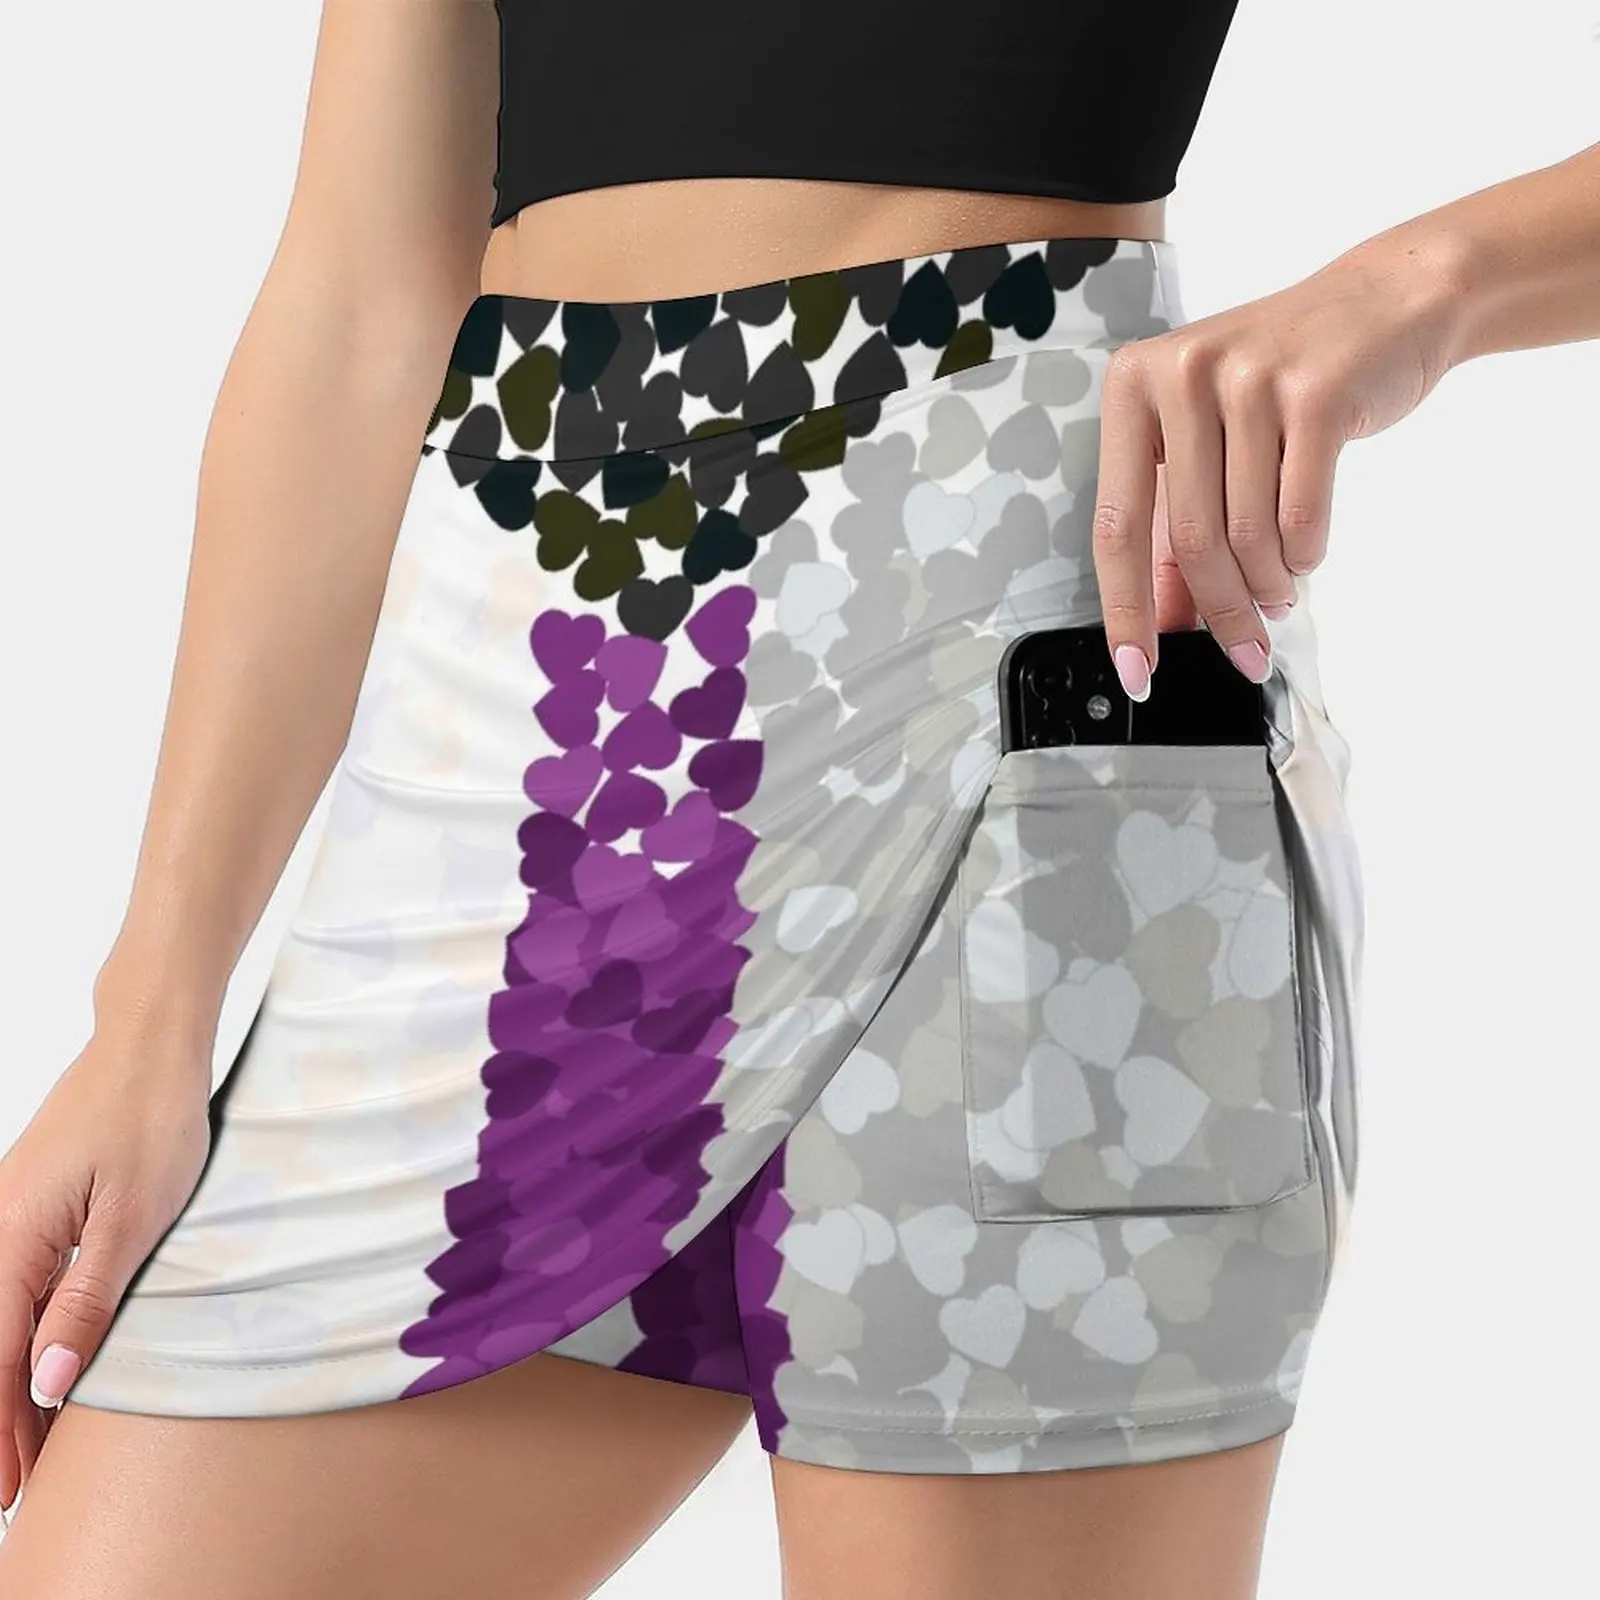 

Demisexual Pride Flag-Falling Hearts Women's skirt Aesthetic skirts New Fashion Short Skirts Demisexual Asexual Qia Qiap